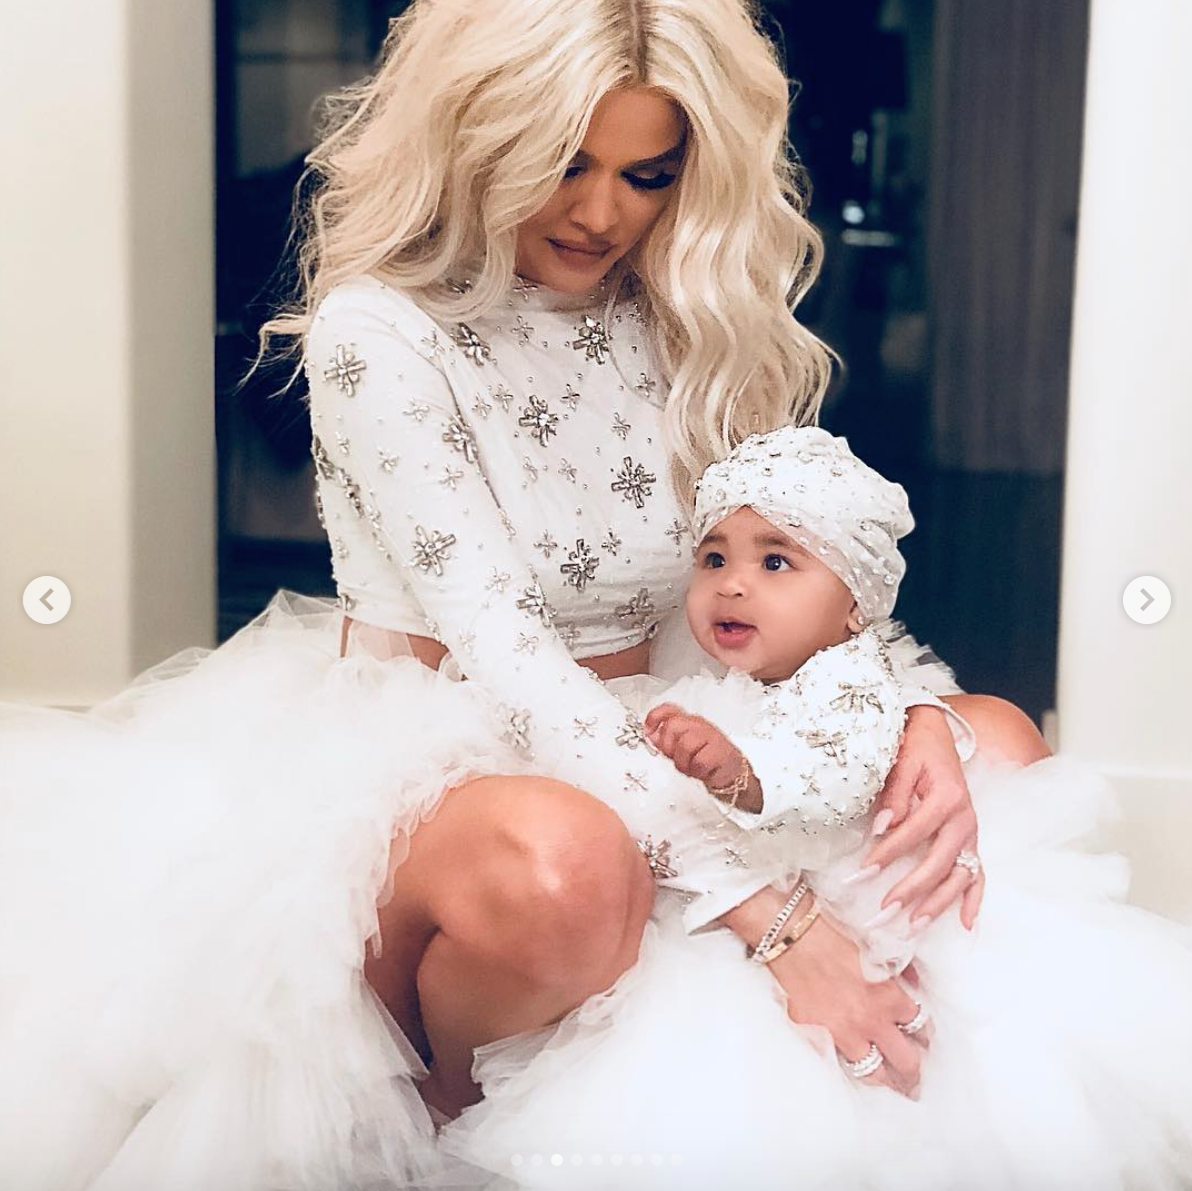 Khloé Kardashian and True Thompson Matched in Sweet White Dresses